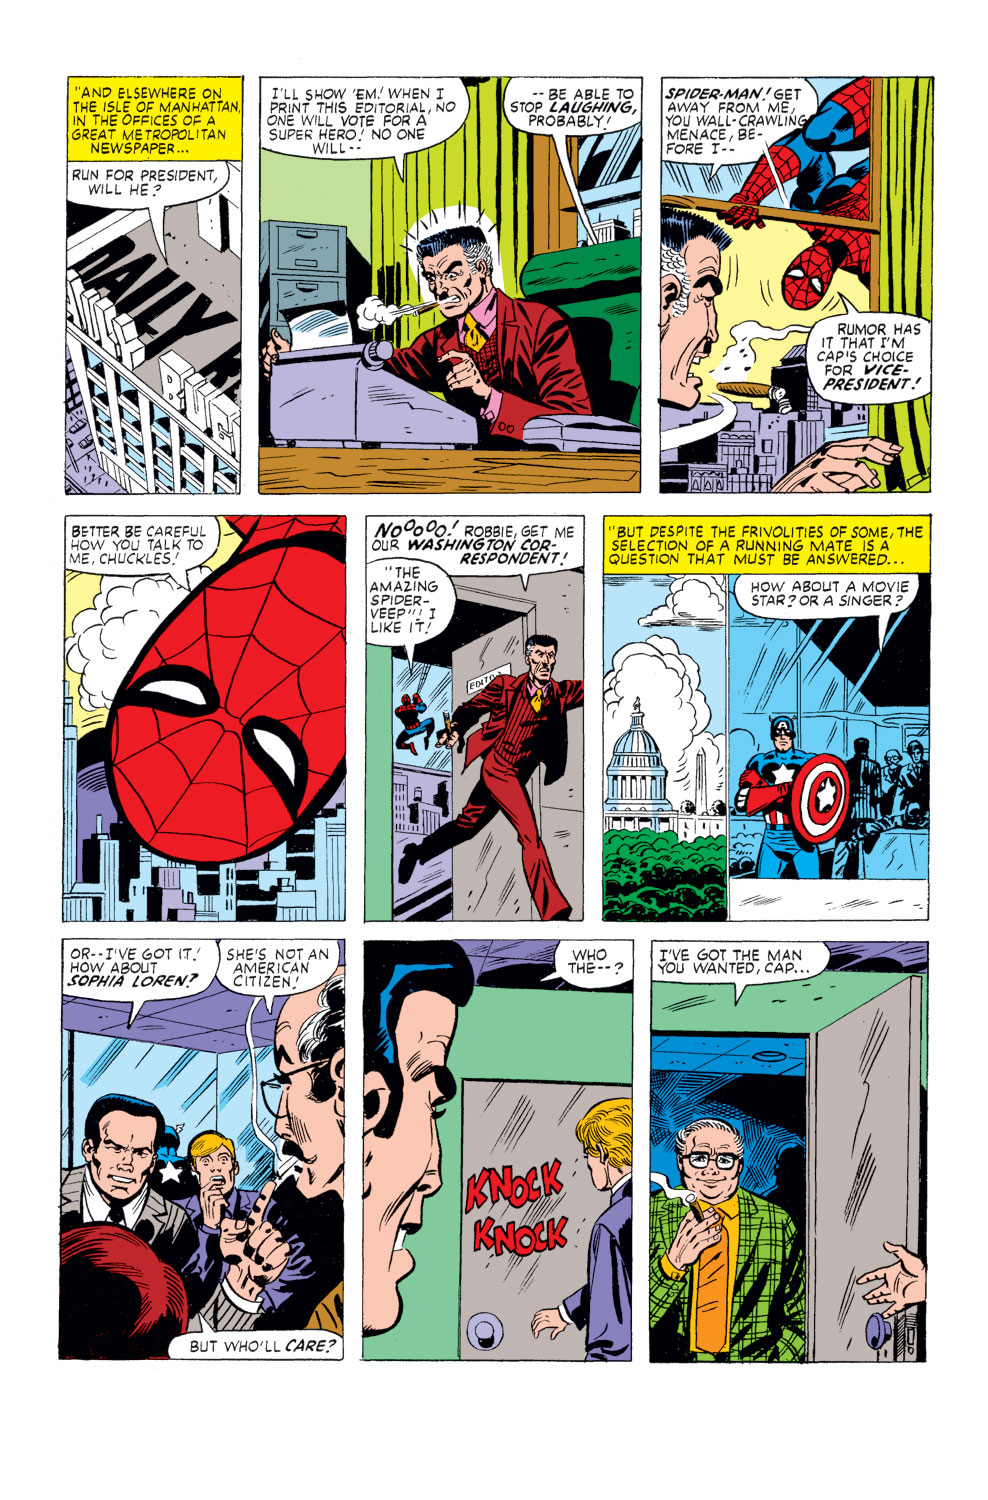 What If? (1977) issue 26 - Captain America had been elected president - Page 5